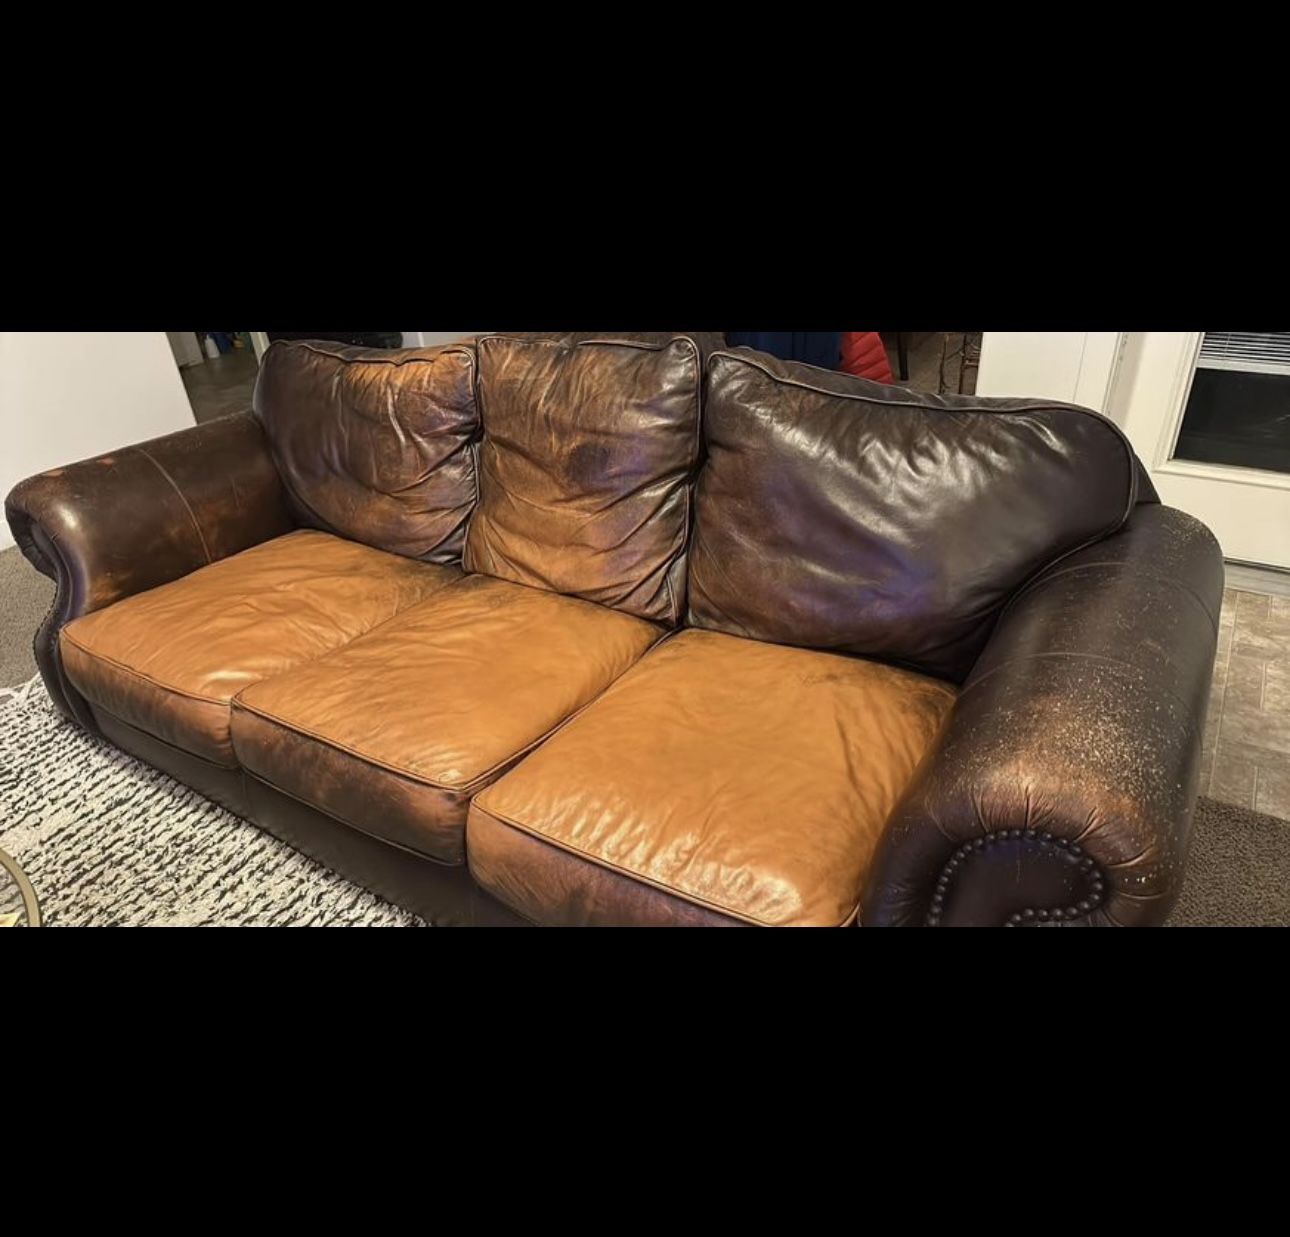 Large Leather Couch - Very Used Condition (Cat Scratches)